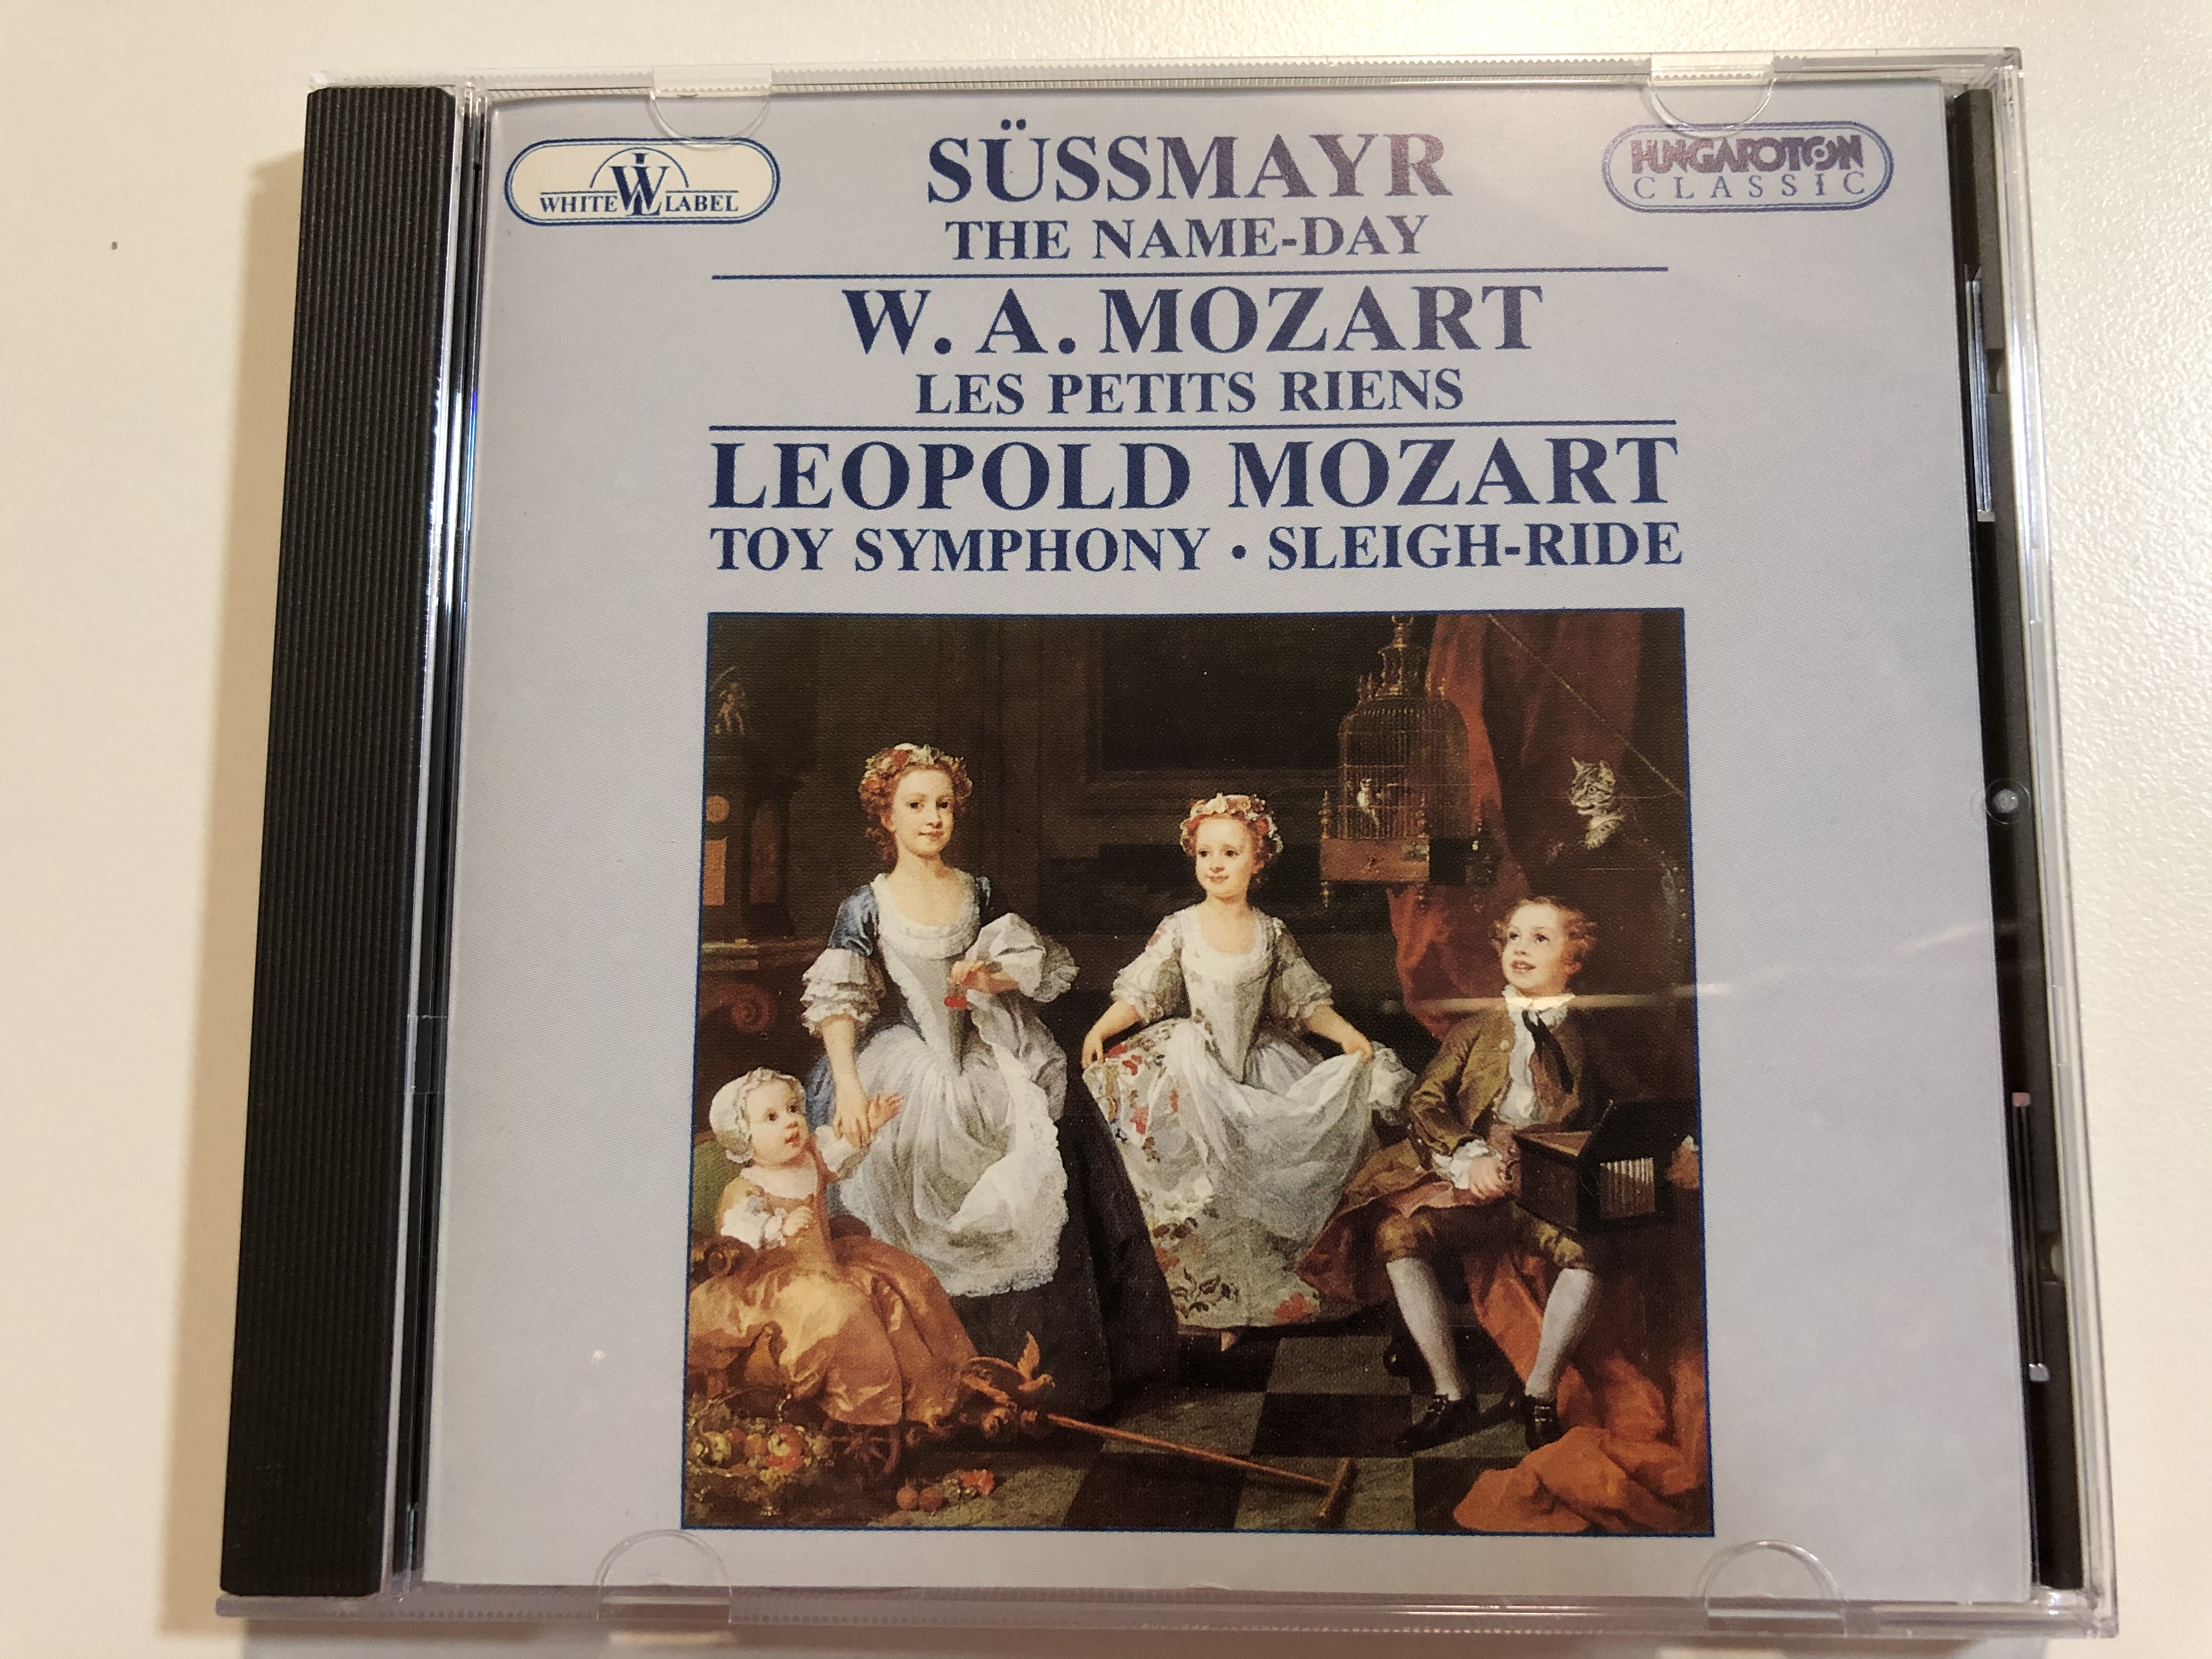 sussmayr-the-name-day-w.a.-mozart-les-petits-riens-leopold-mozart-toy-symphony-sleigh-rise-hungaroton-classic-audio-cd-1994-hrc-066-1-.jpg